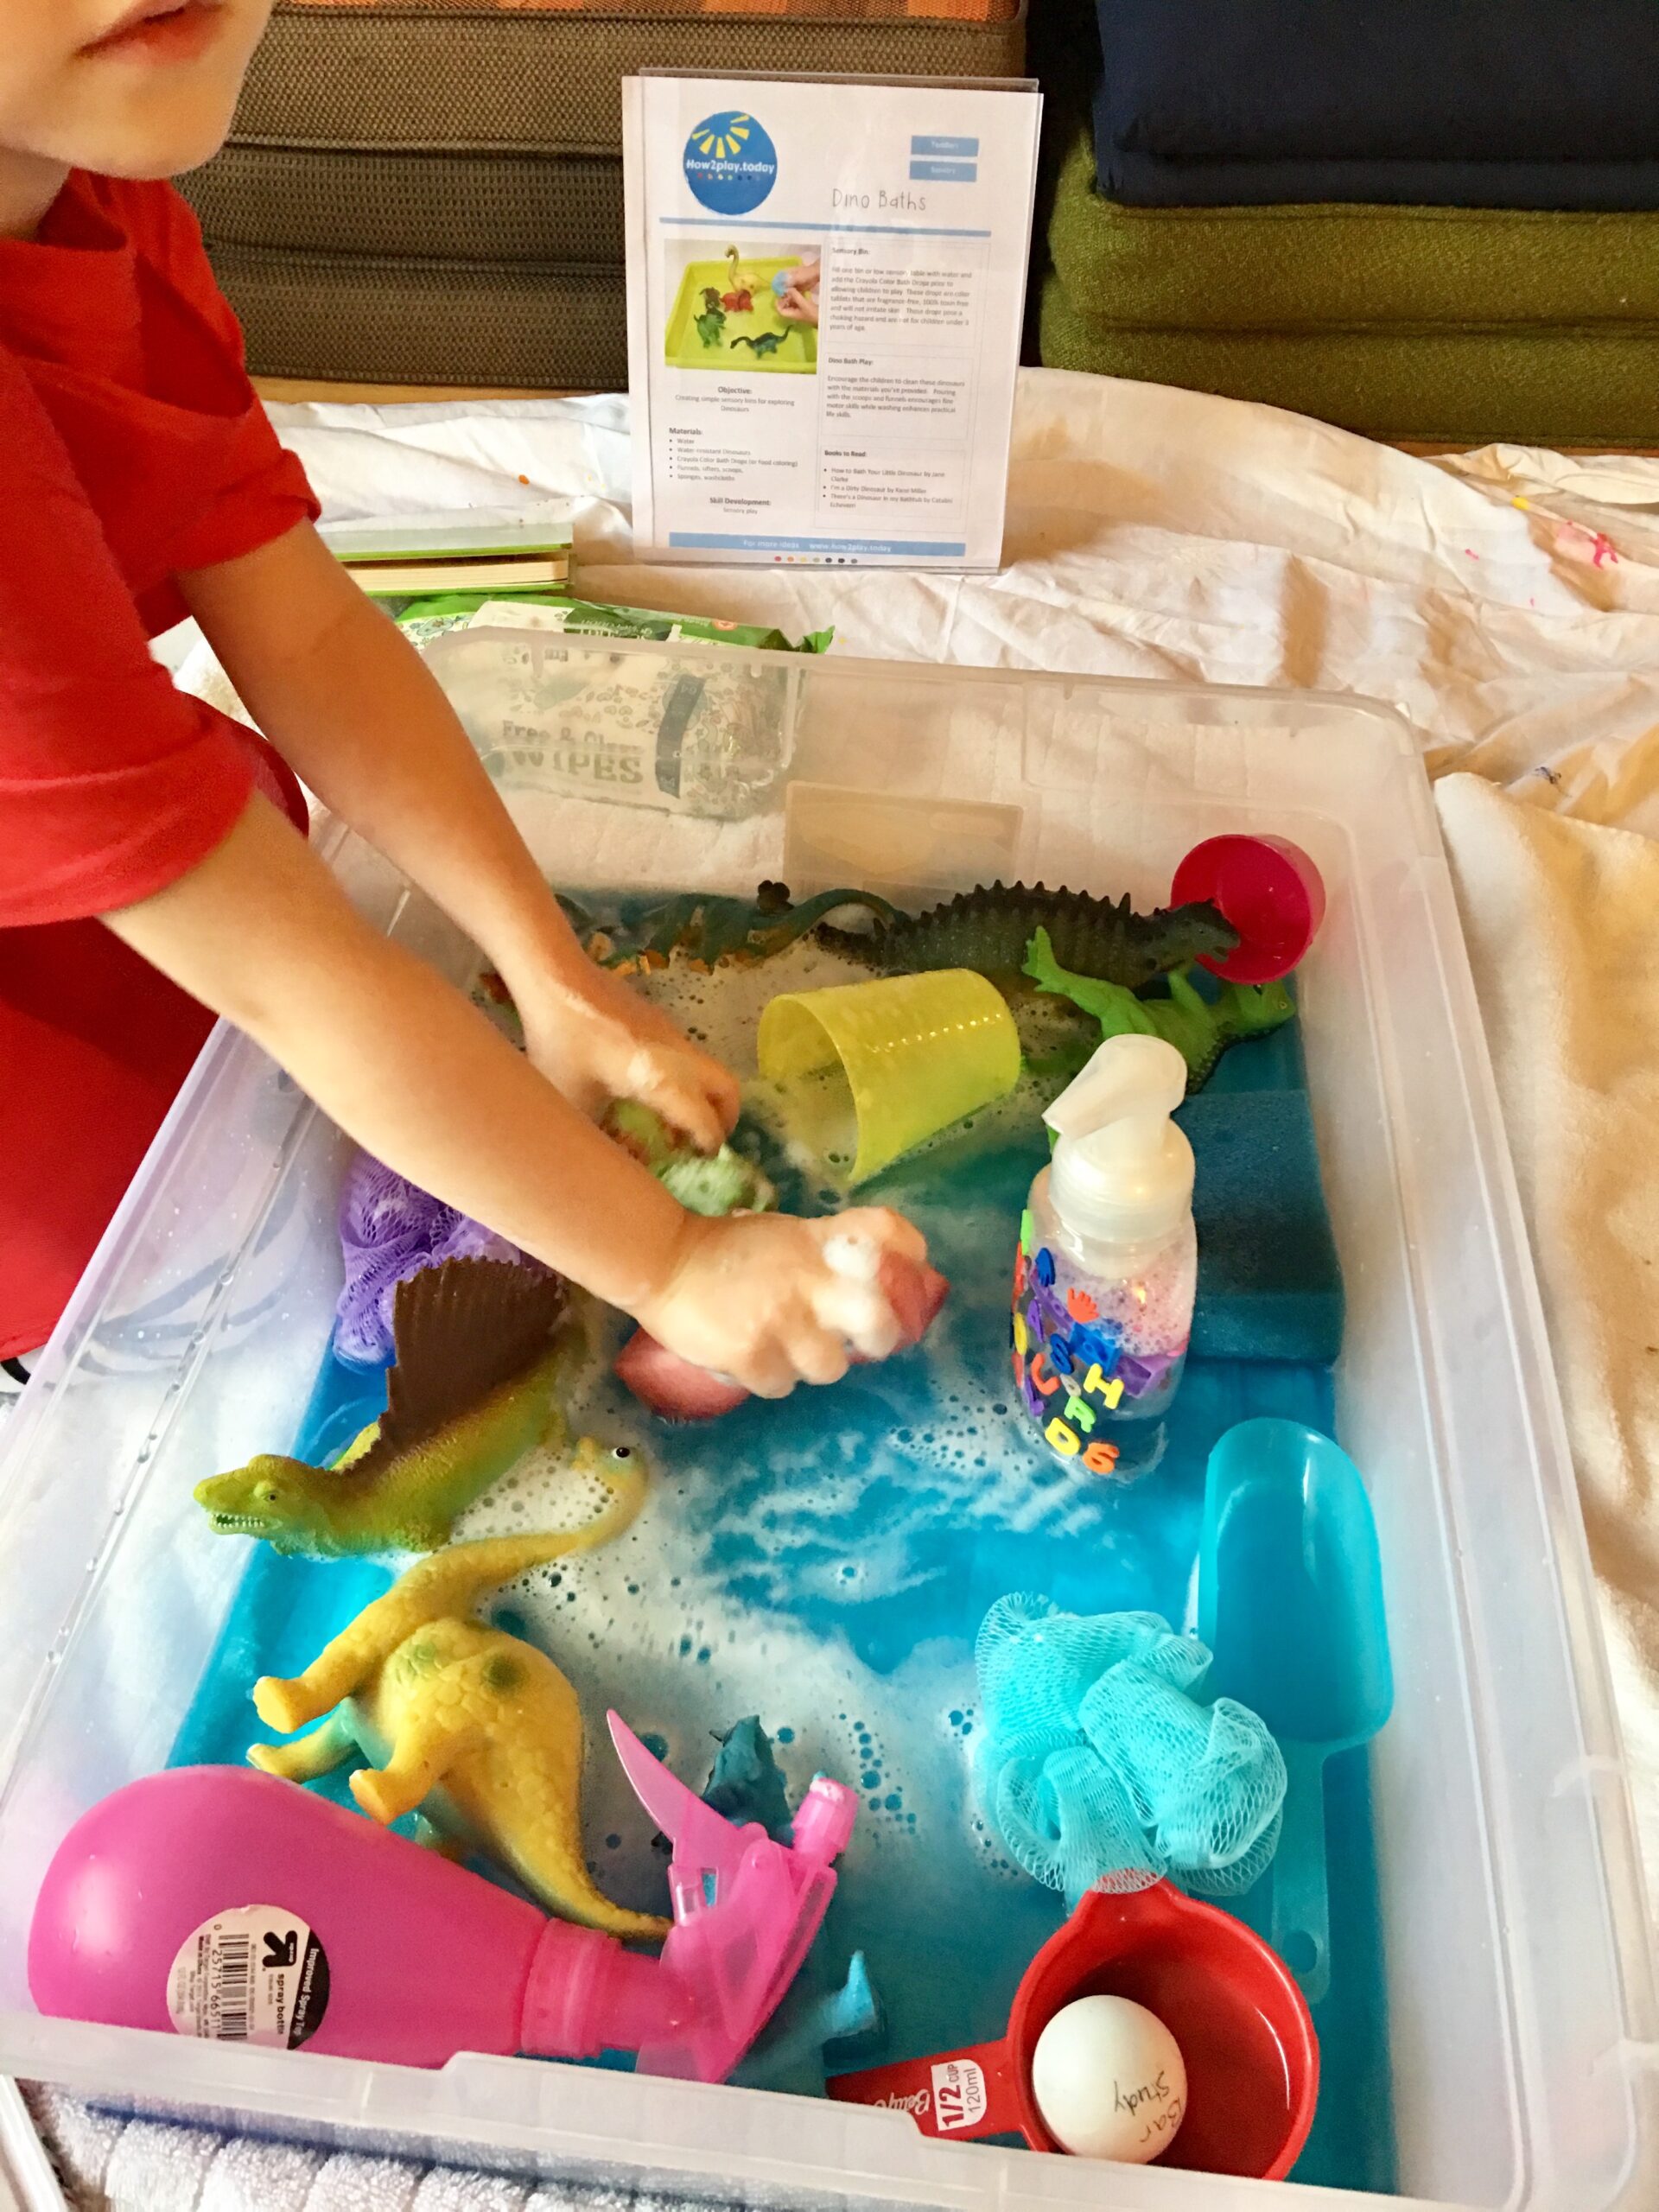 Easy senory bin you can create during nap time.